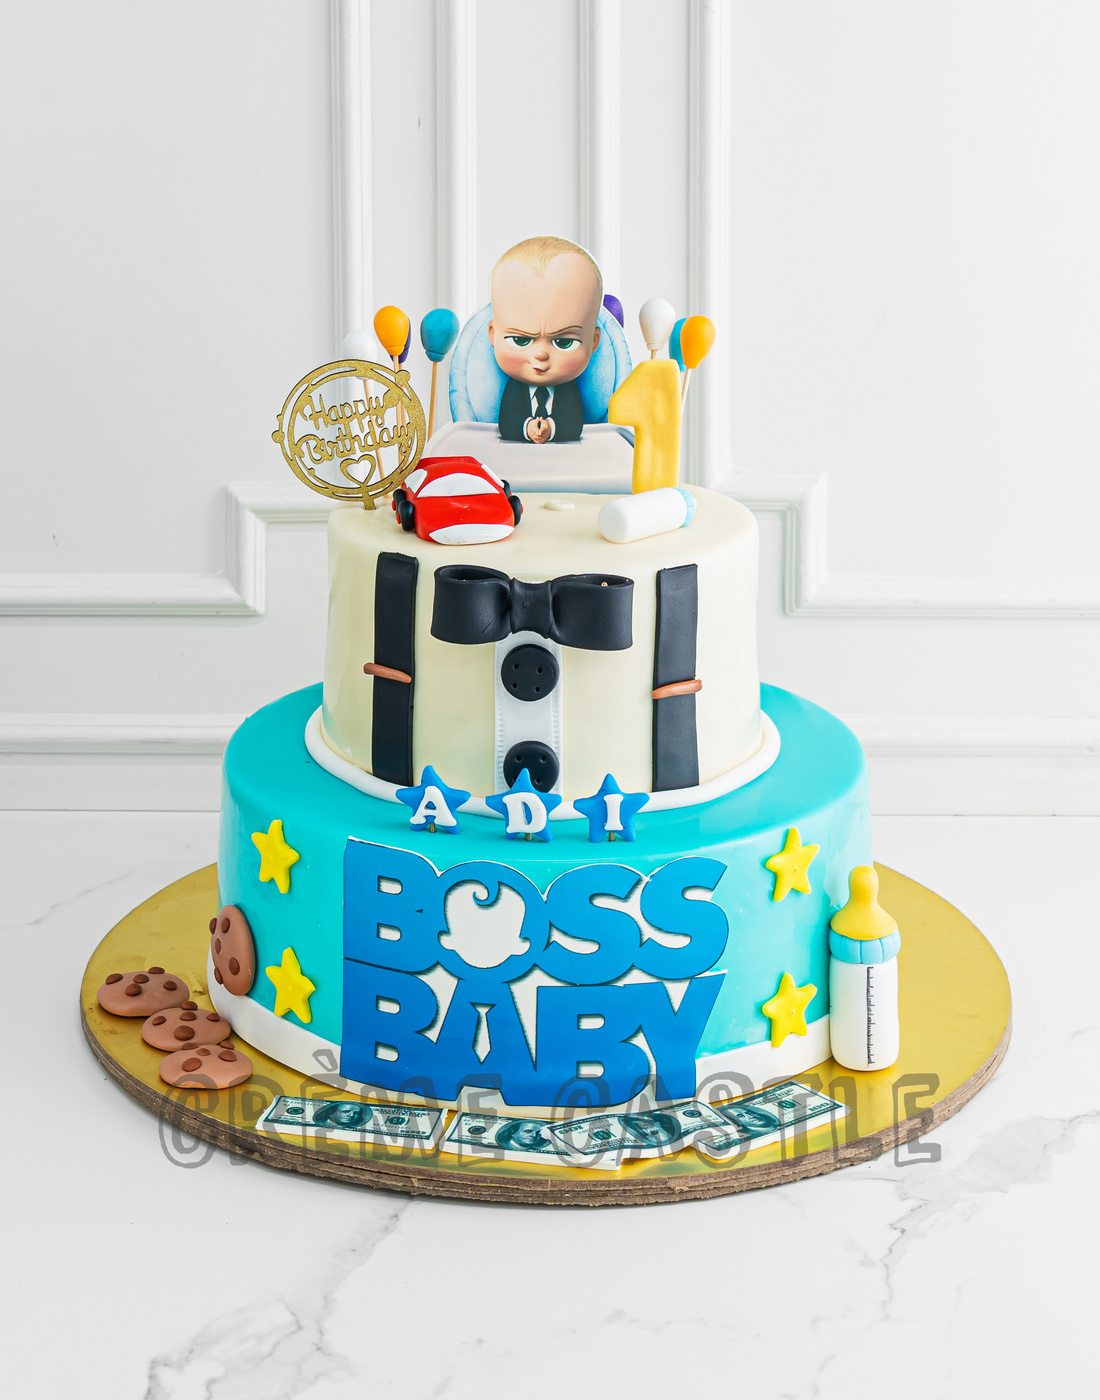 Boss Baby Big Cake Topper - 1pcs: Buy Online at Best Price in Egypt - Souq  is now Amazon.eg